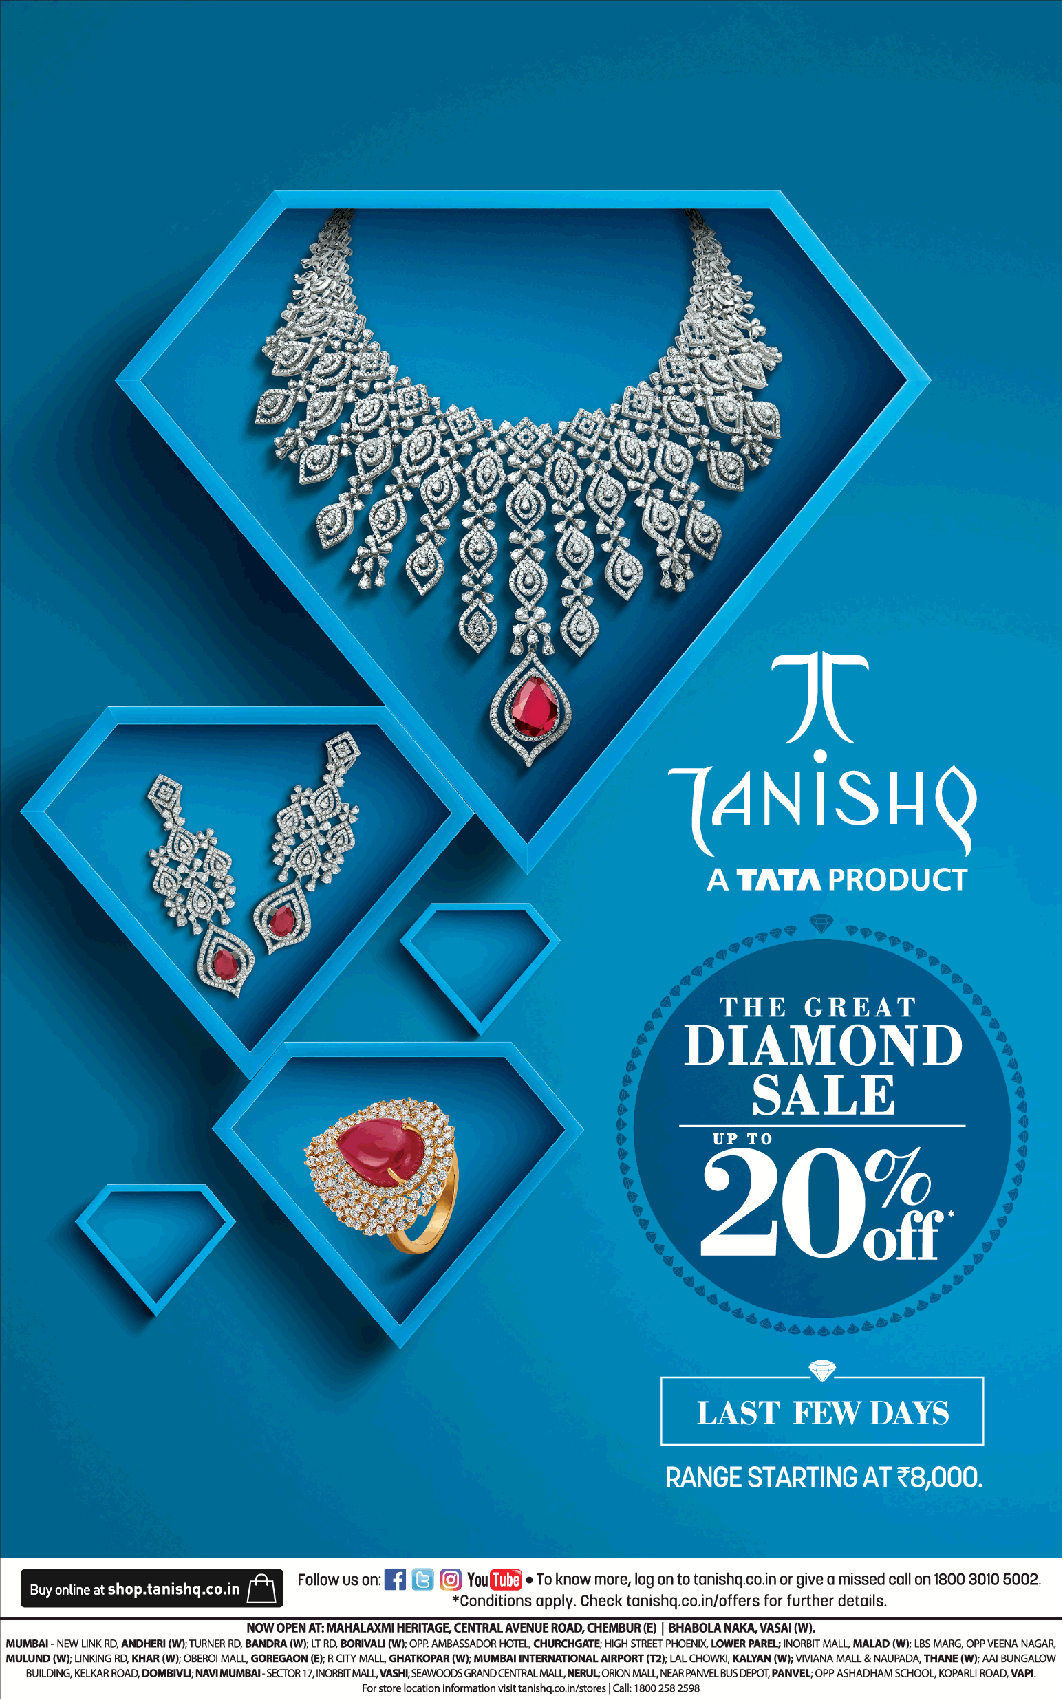 tanishq-the-great-diamond-sale-upto-20%-off-ad-times-of-india-mumbai-23-02-2019.png